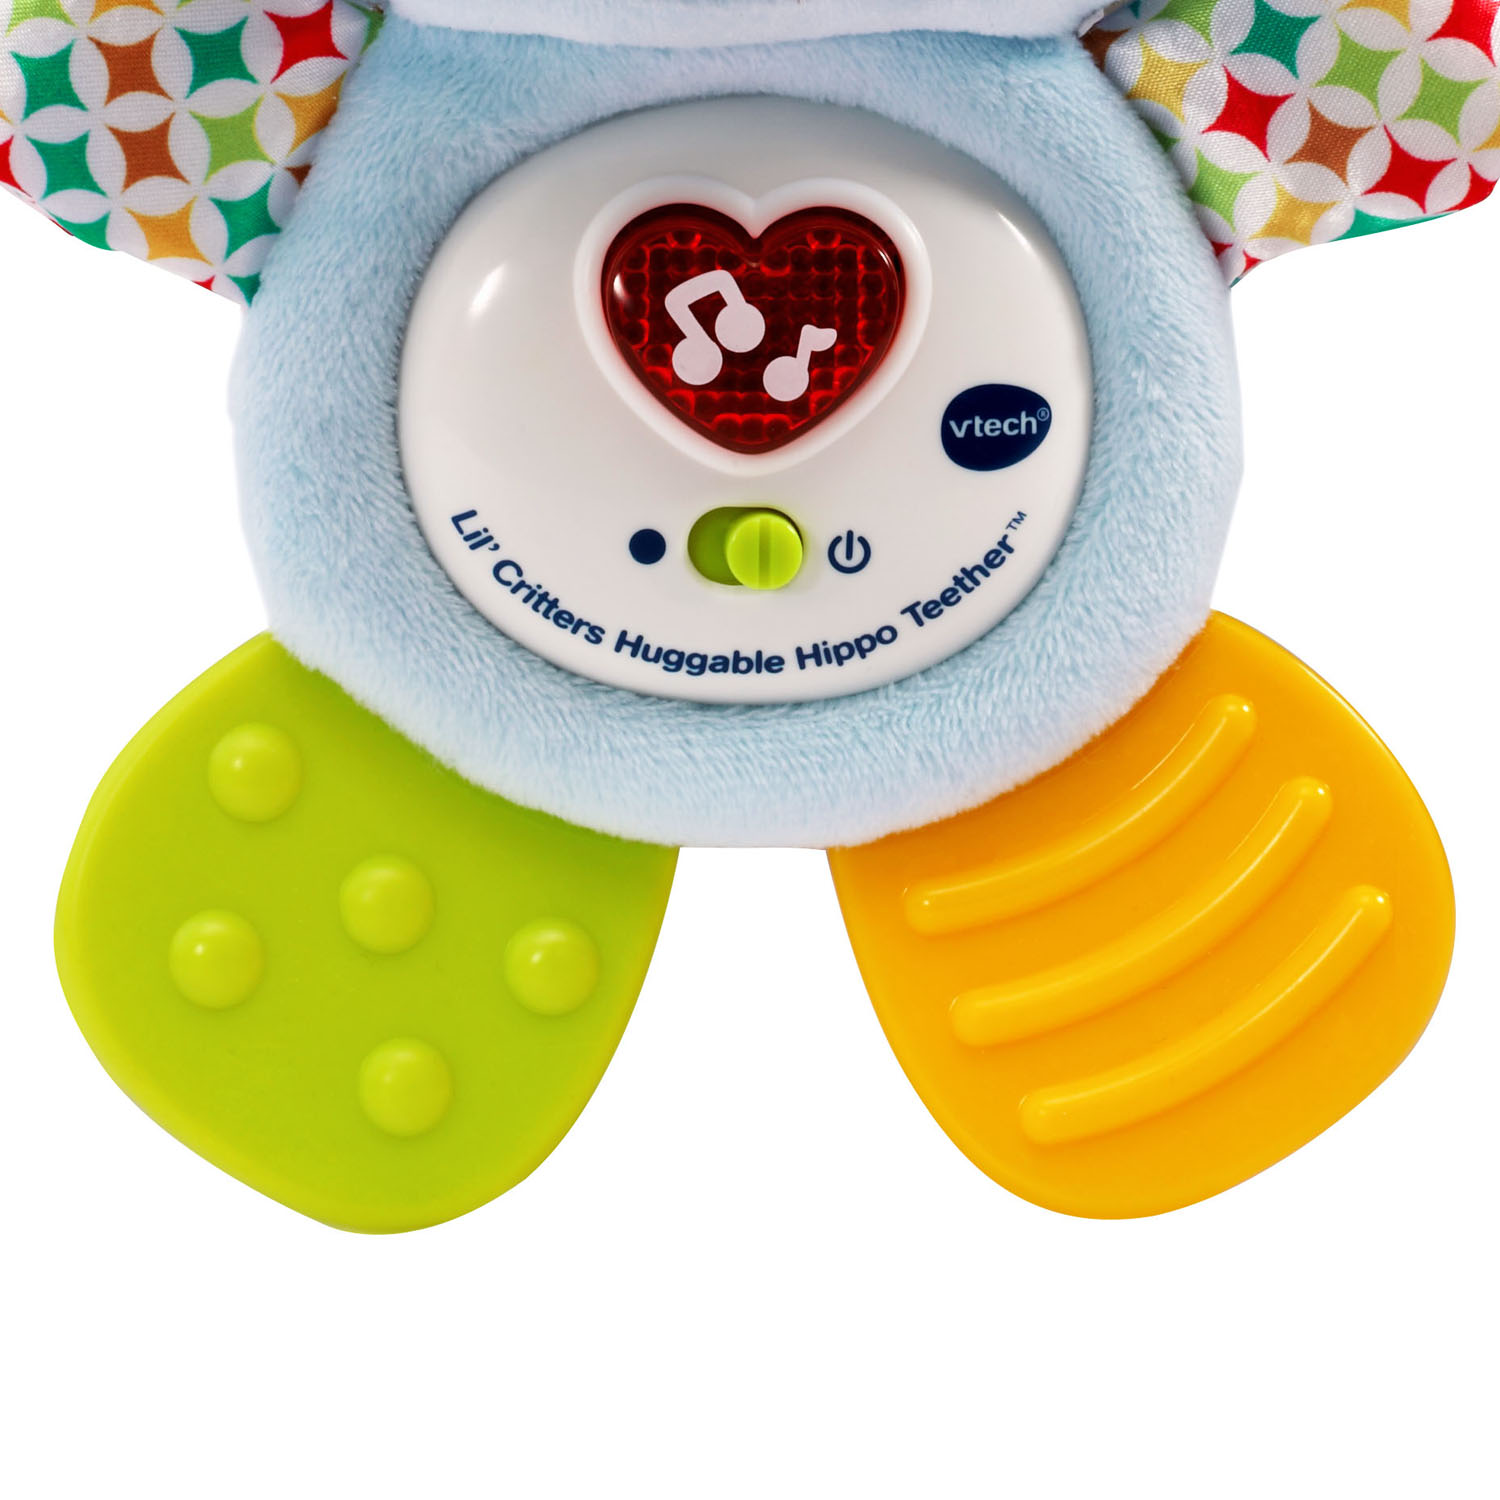 VTech Lil' Critters Huggable Hippo Teether - image 6 of 6